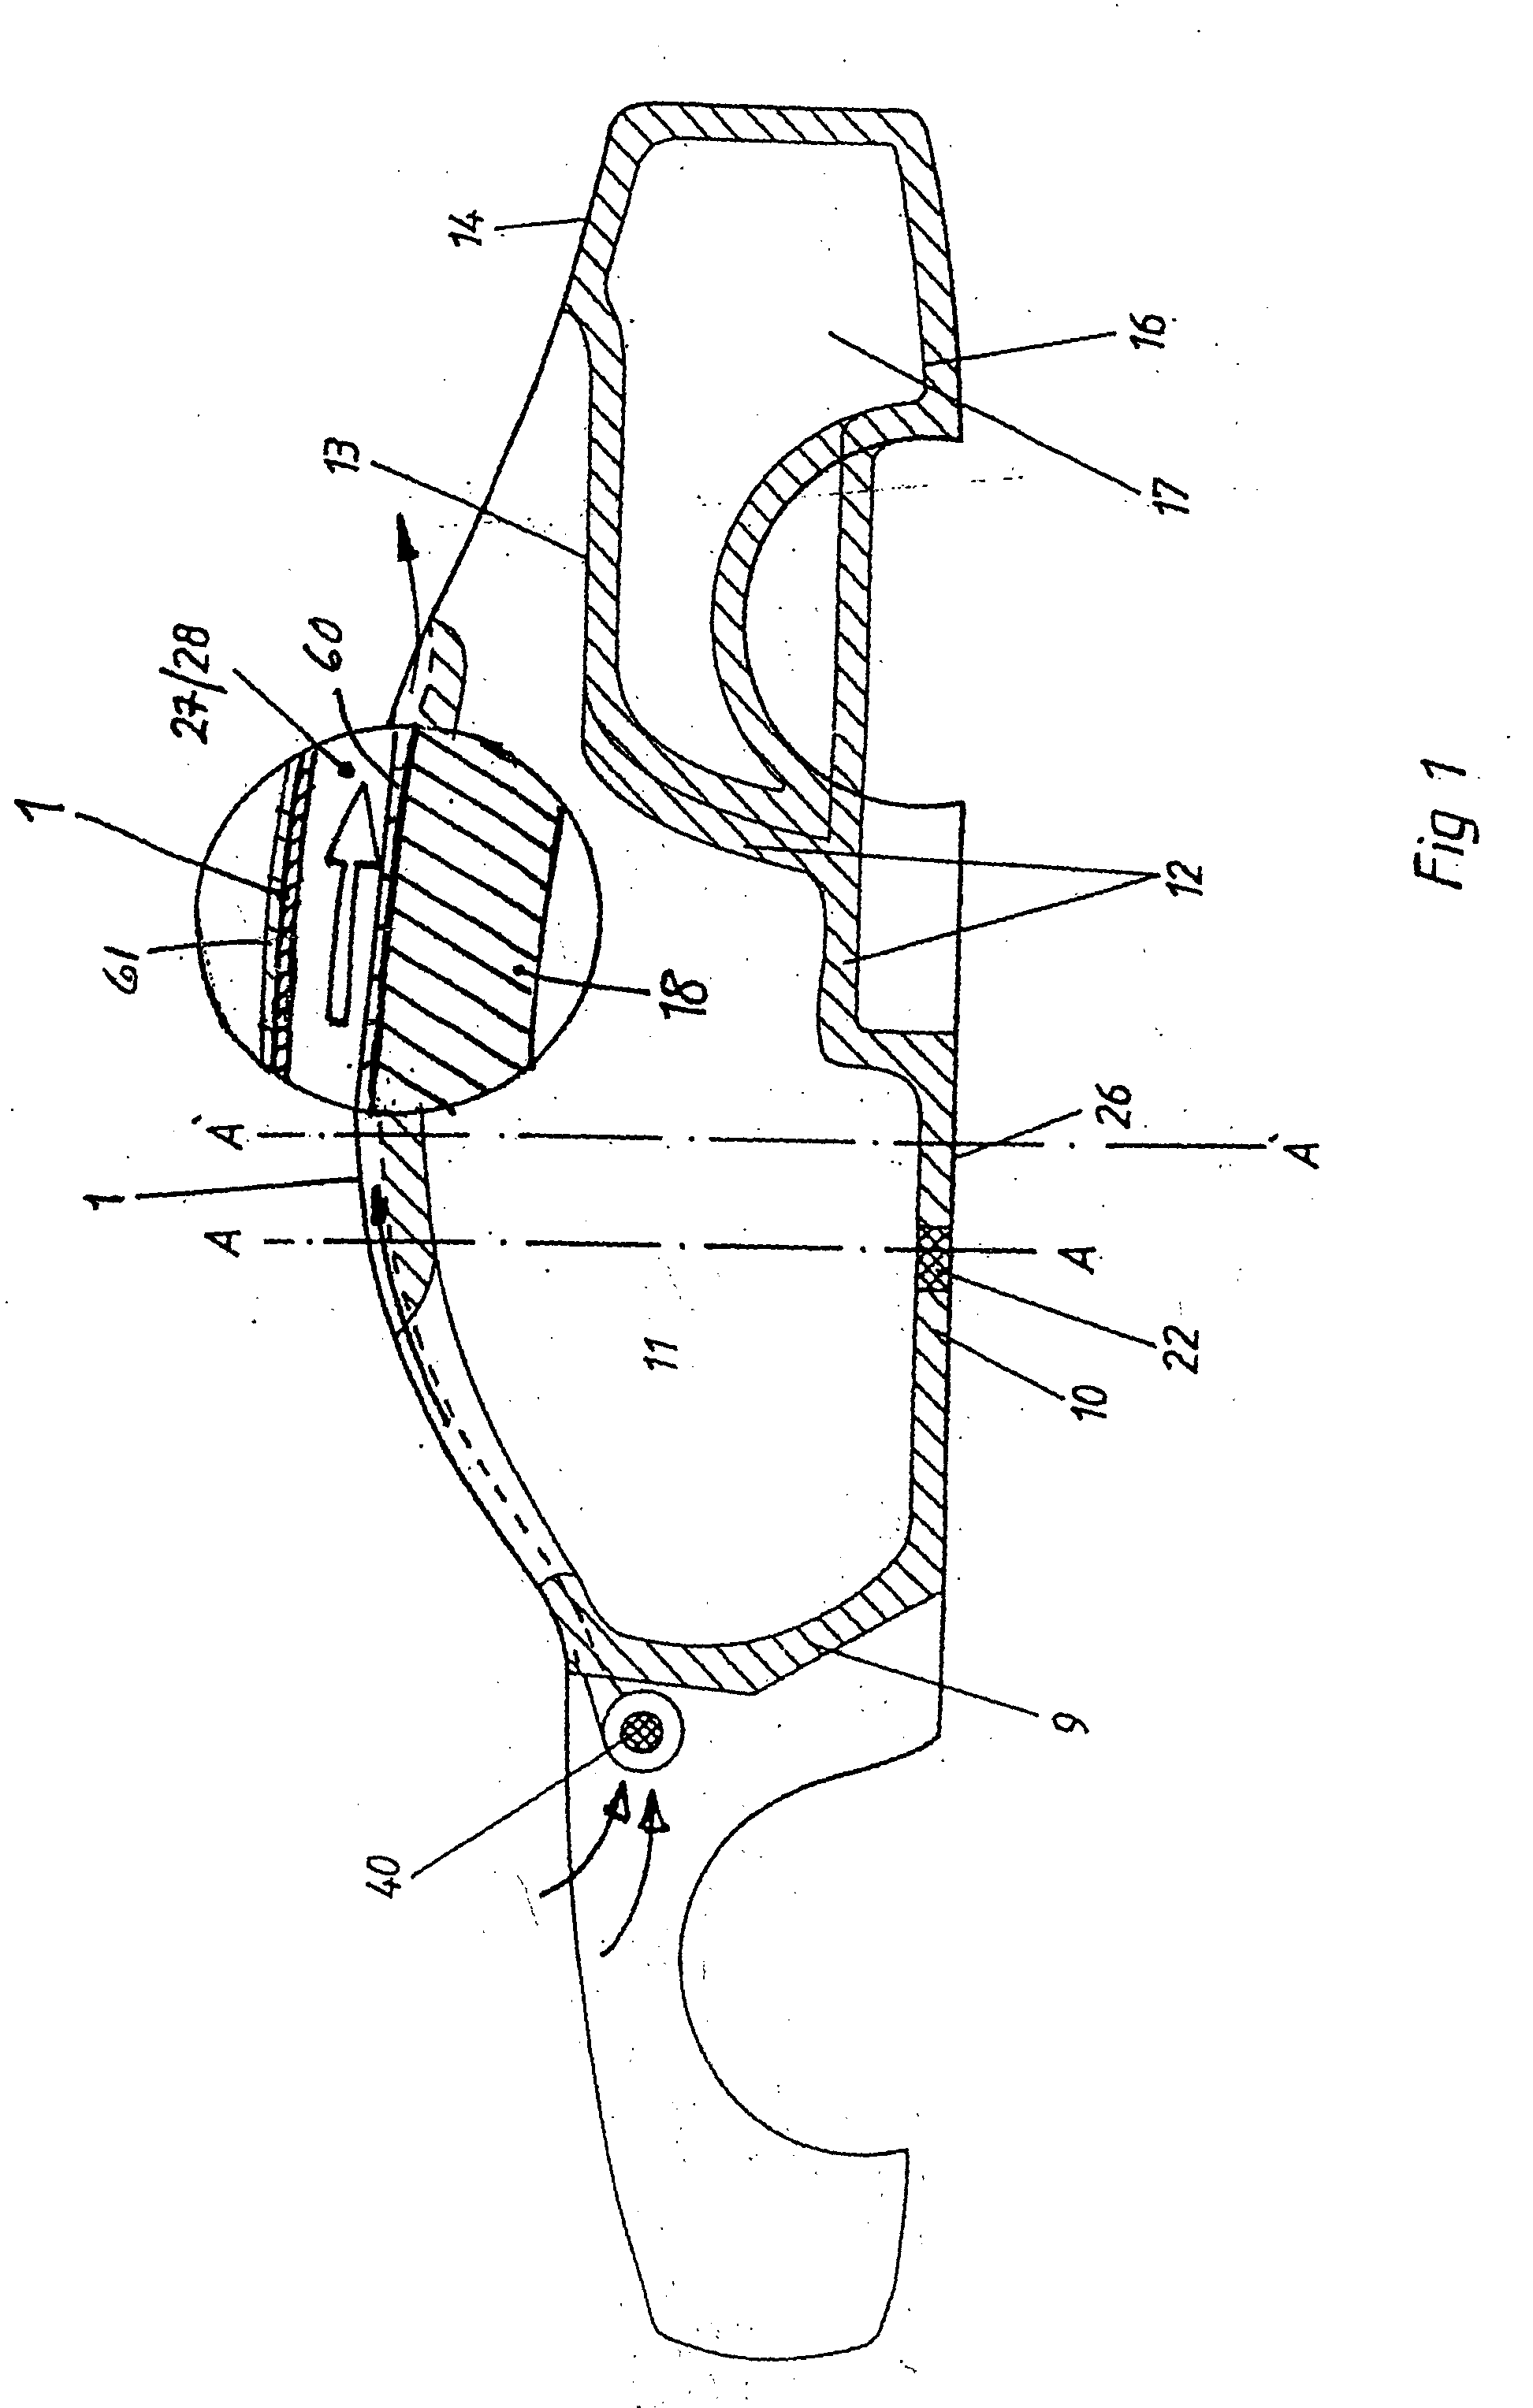 Motor vehicle passenger compartment heat insulation and dissipation